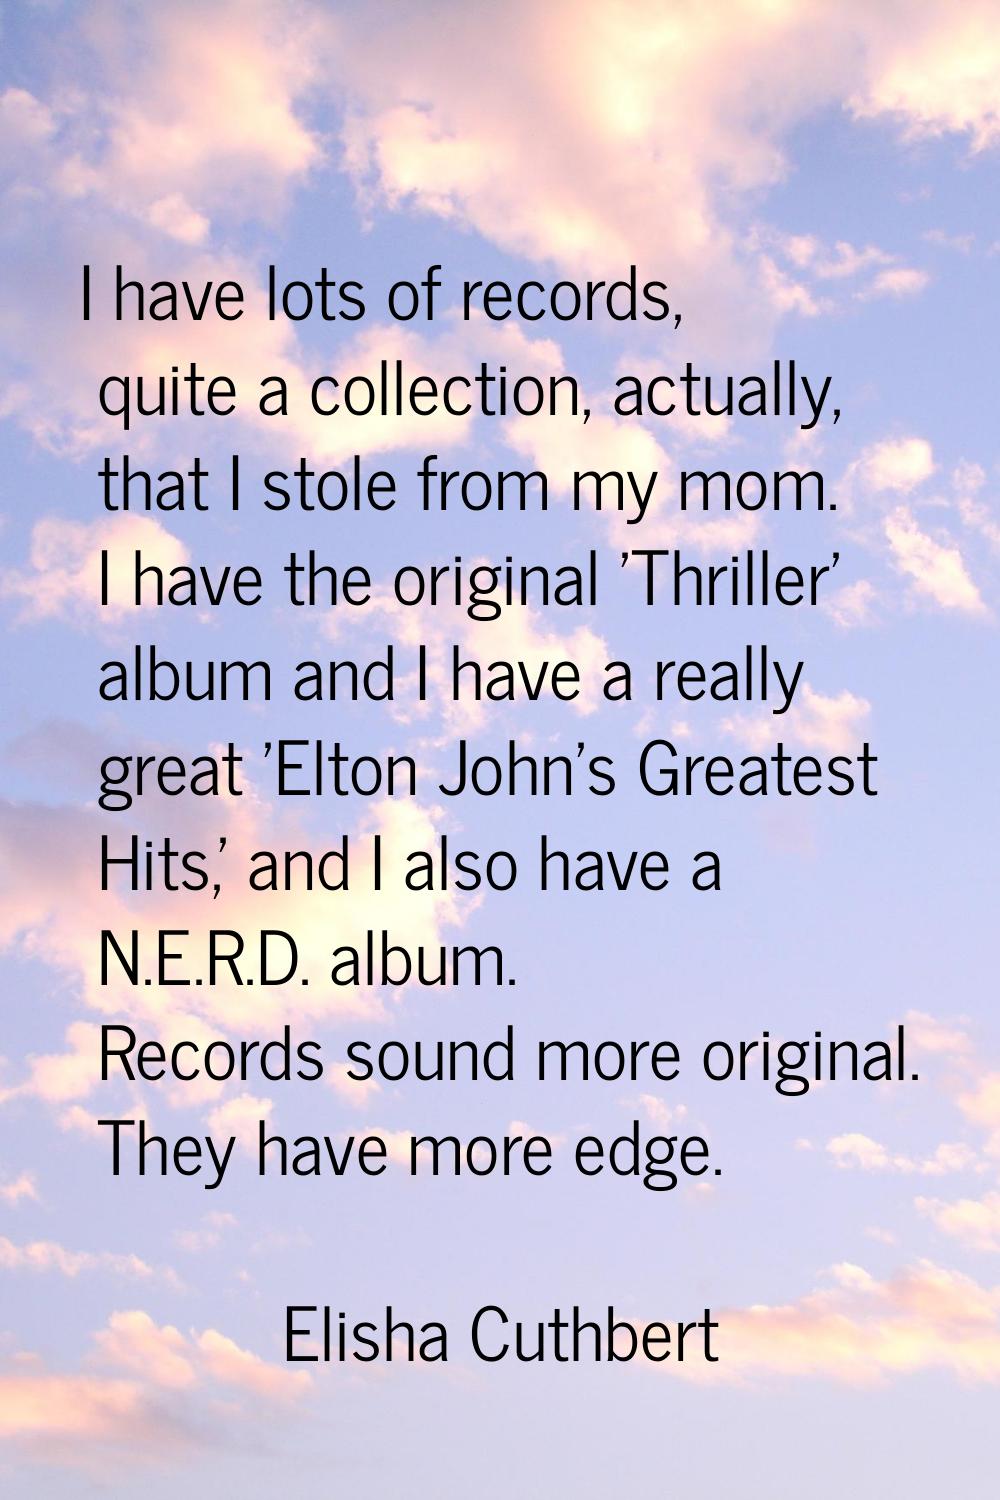 I have lots of records, quite a collection, actually, that I stole from my mom. I have the original